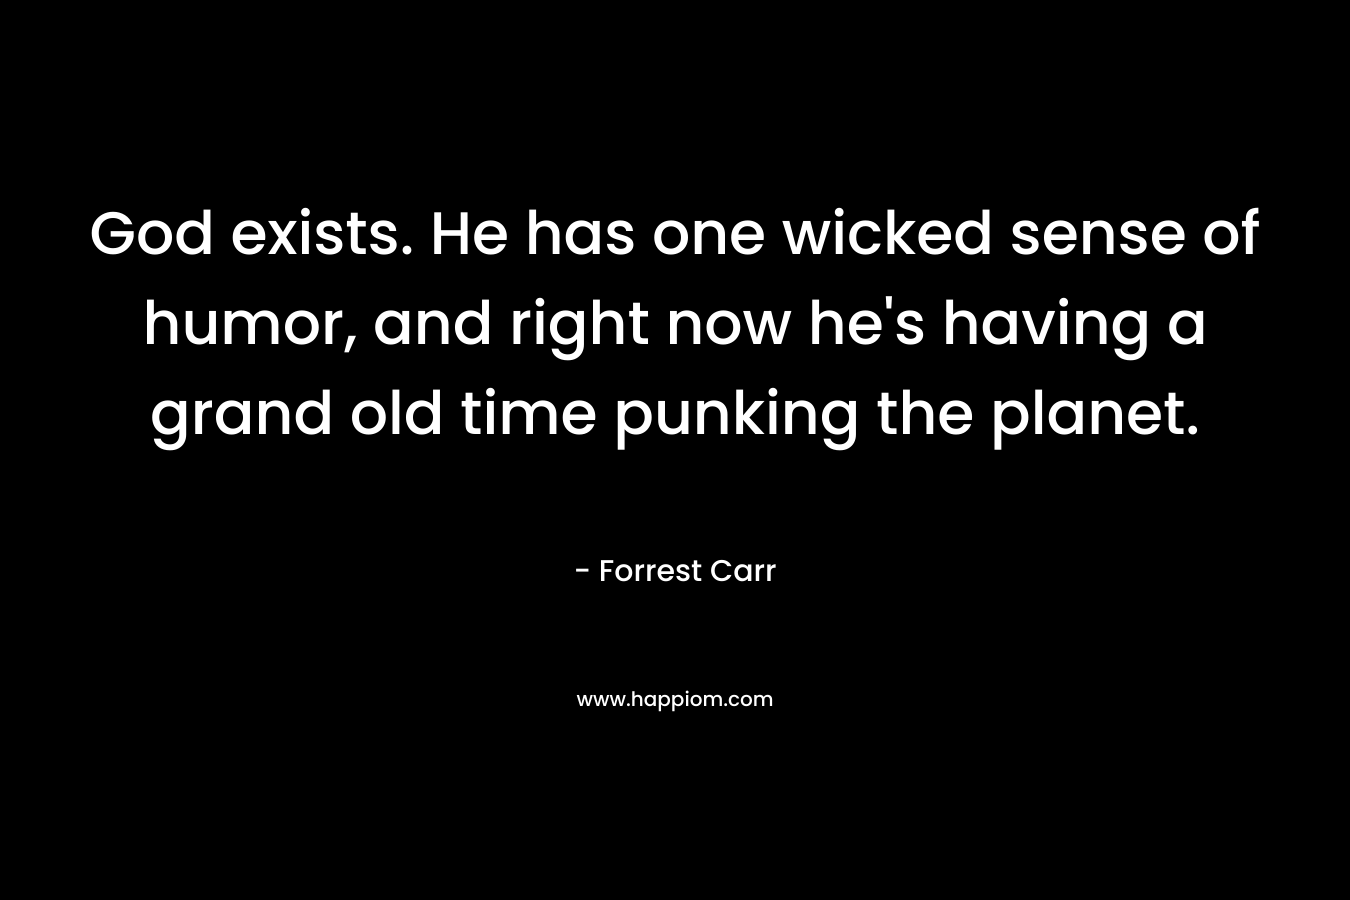 God exists. He has one wicked sense of humor, and right now he’s having a grand old time punking the planet. – Forrest Carr